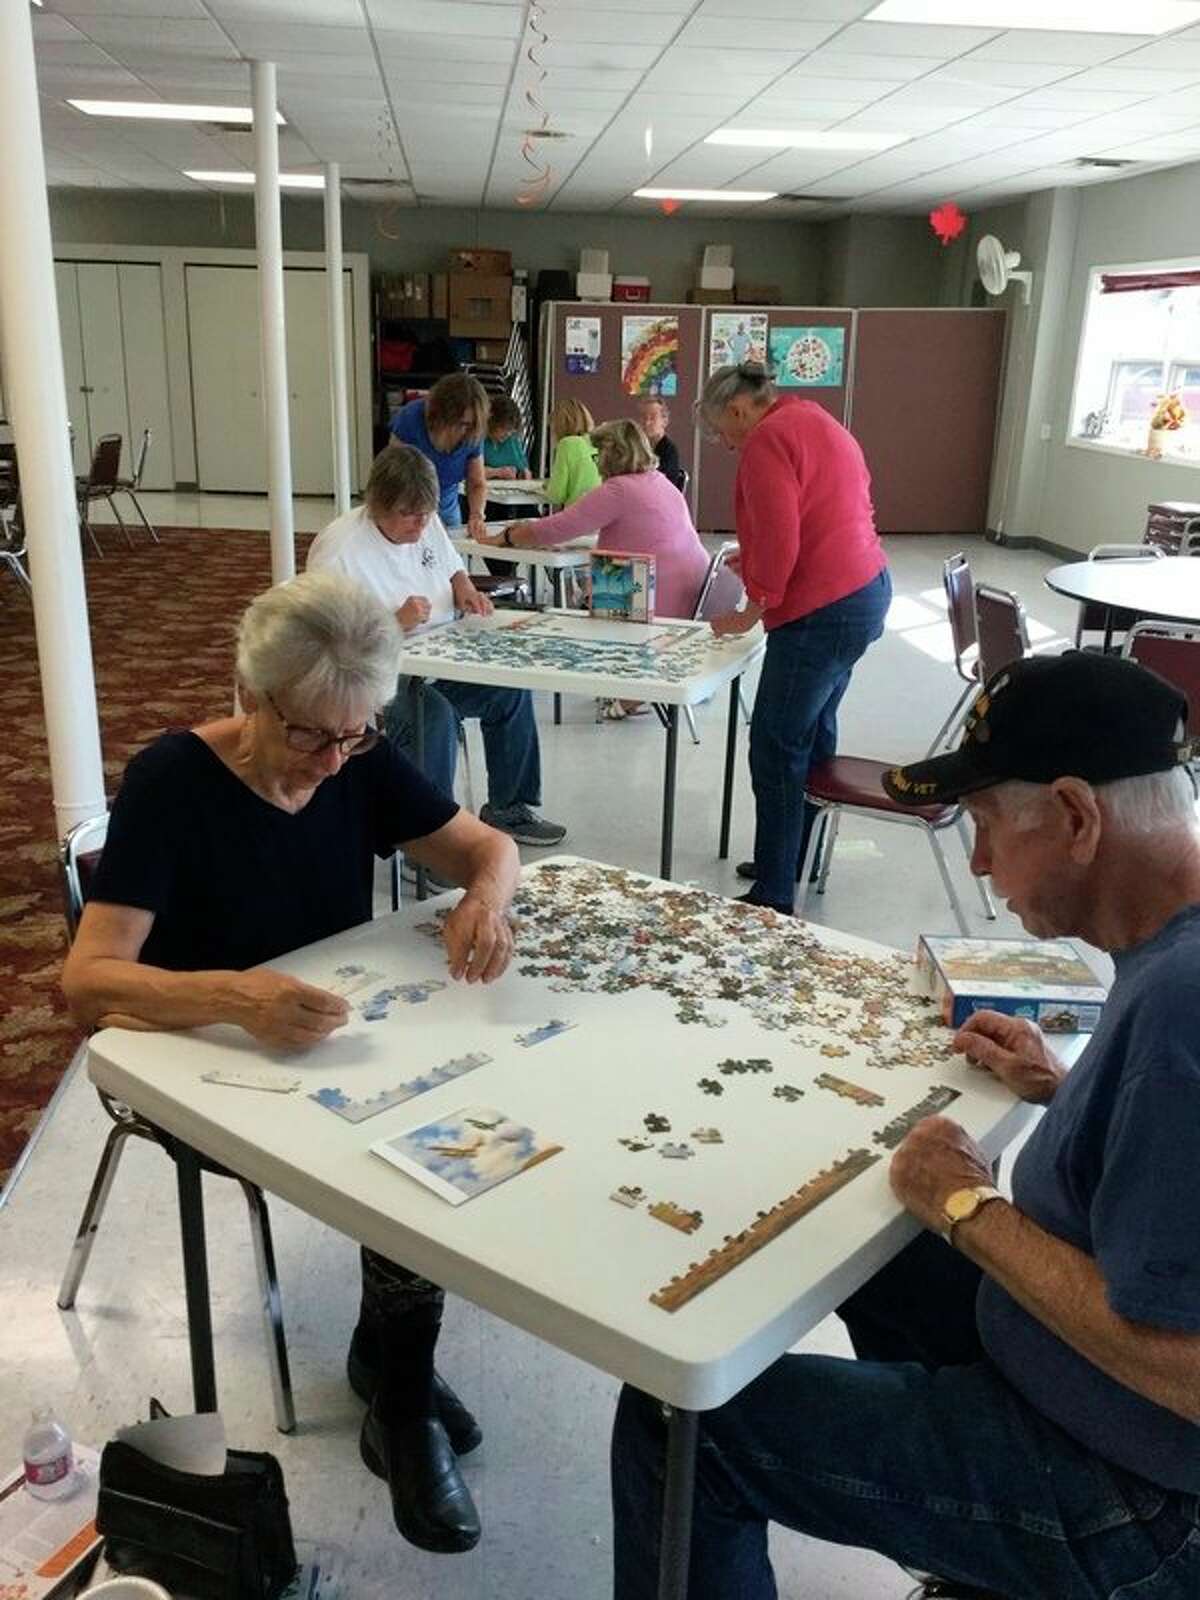 The senior center hosted a pizza and puzzle night last week at the senior center. Just one of the fun activities available at the center. (Courtesy Photo)